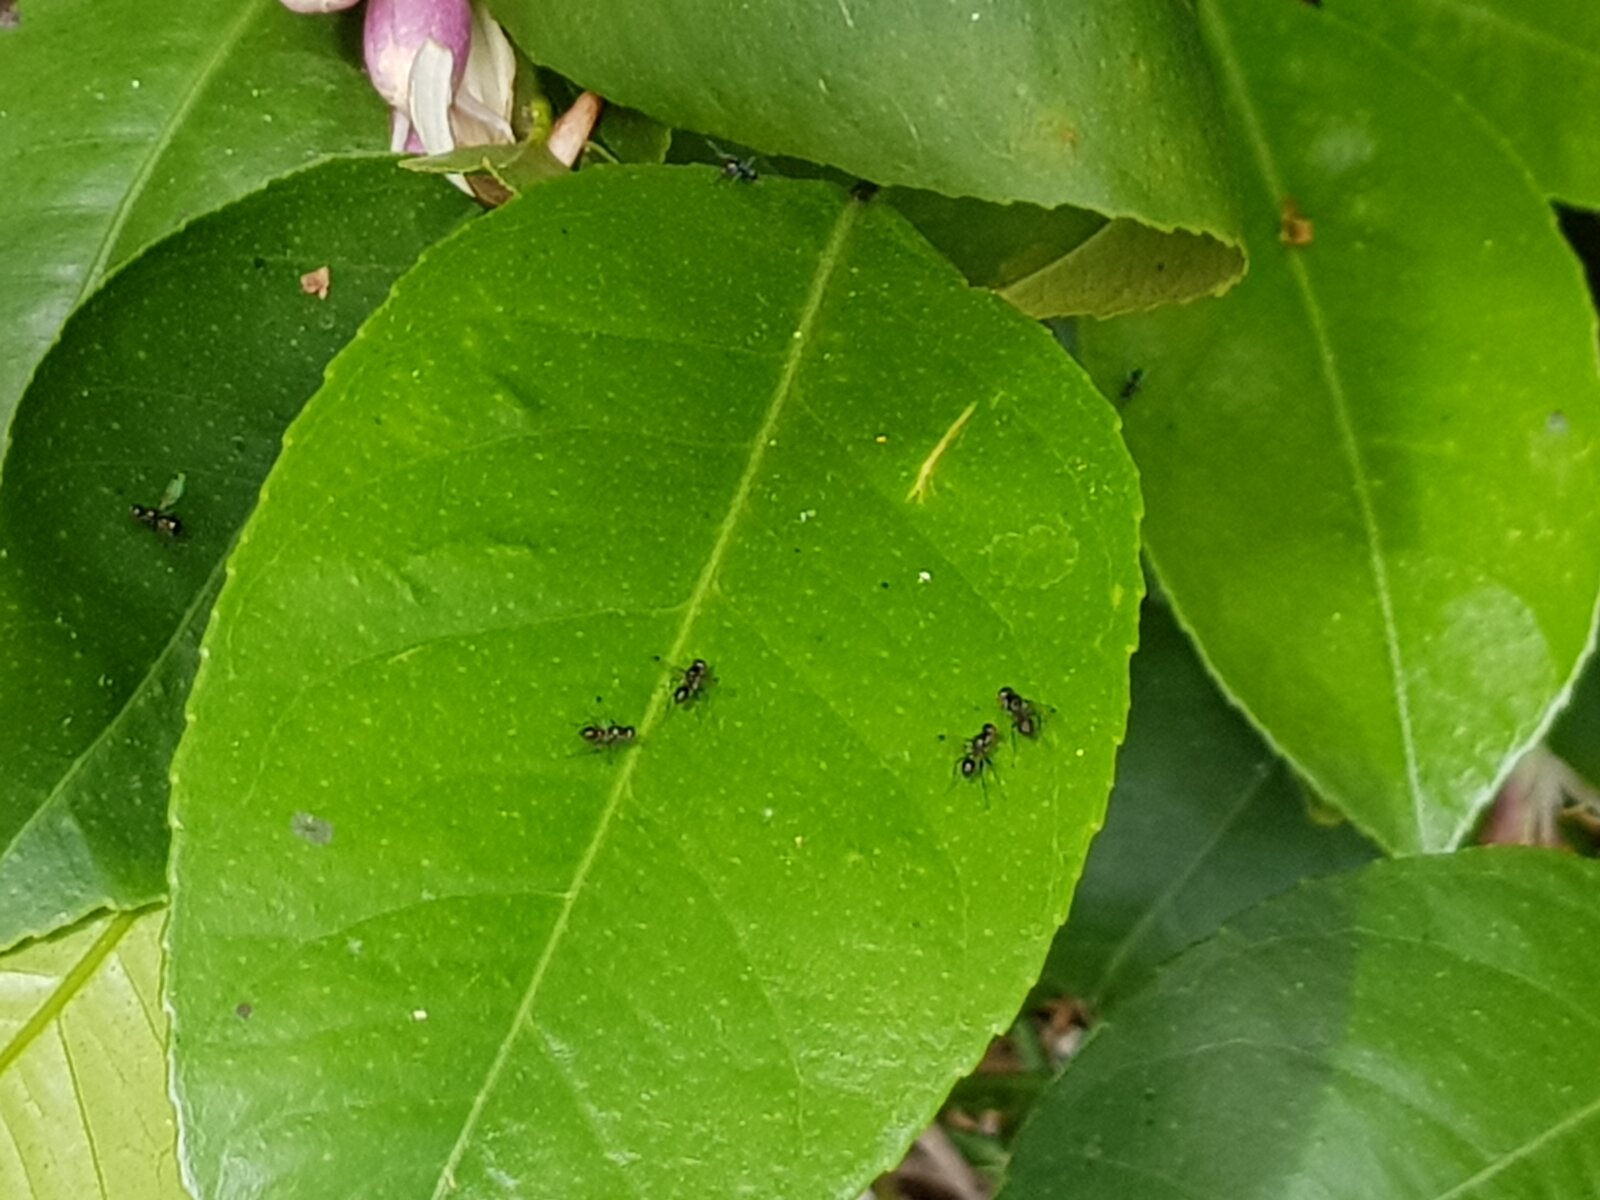 The multitude of insects on the lemon tree today